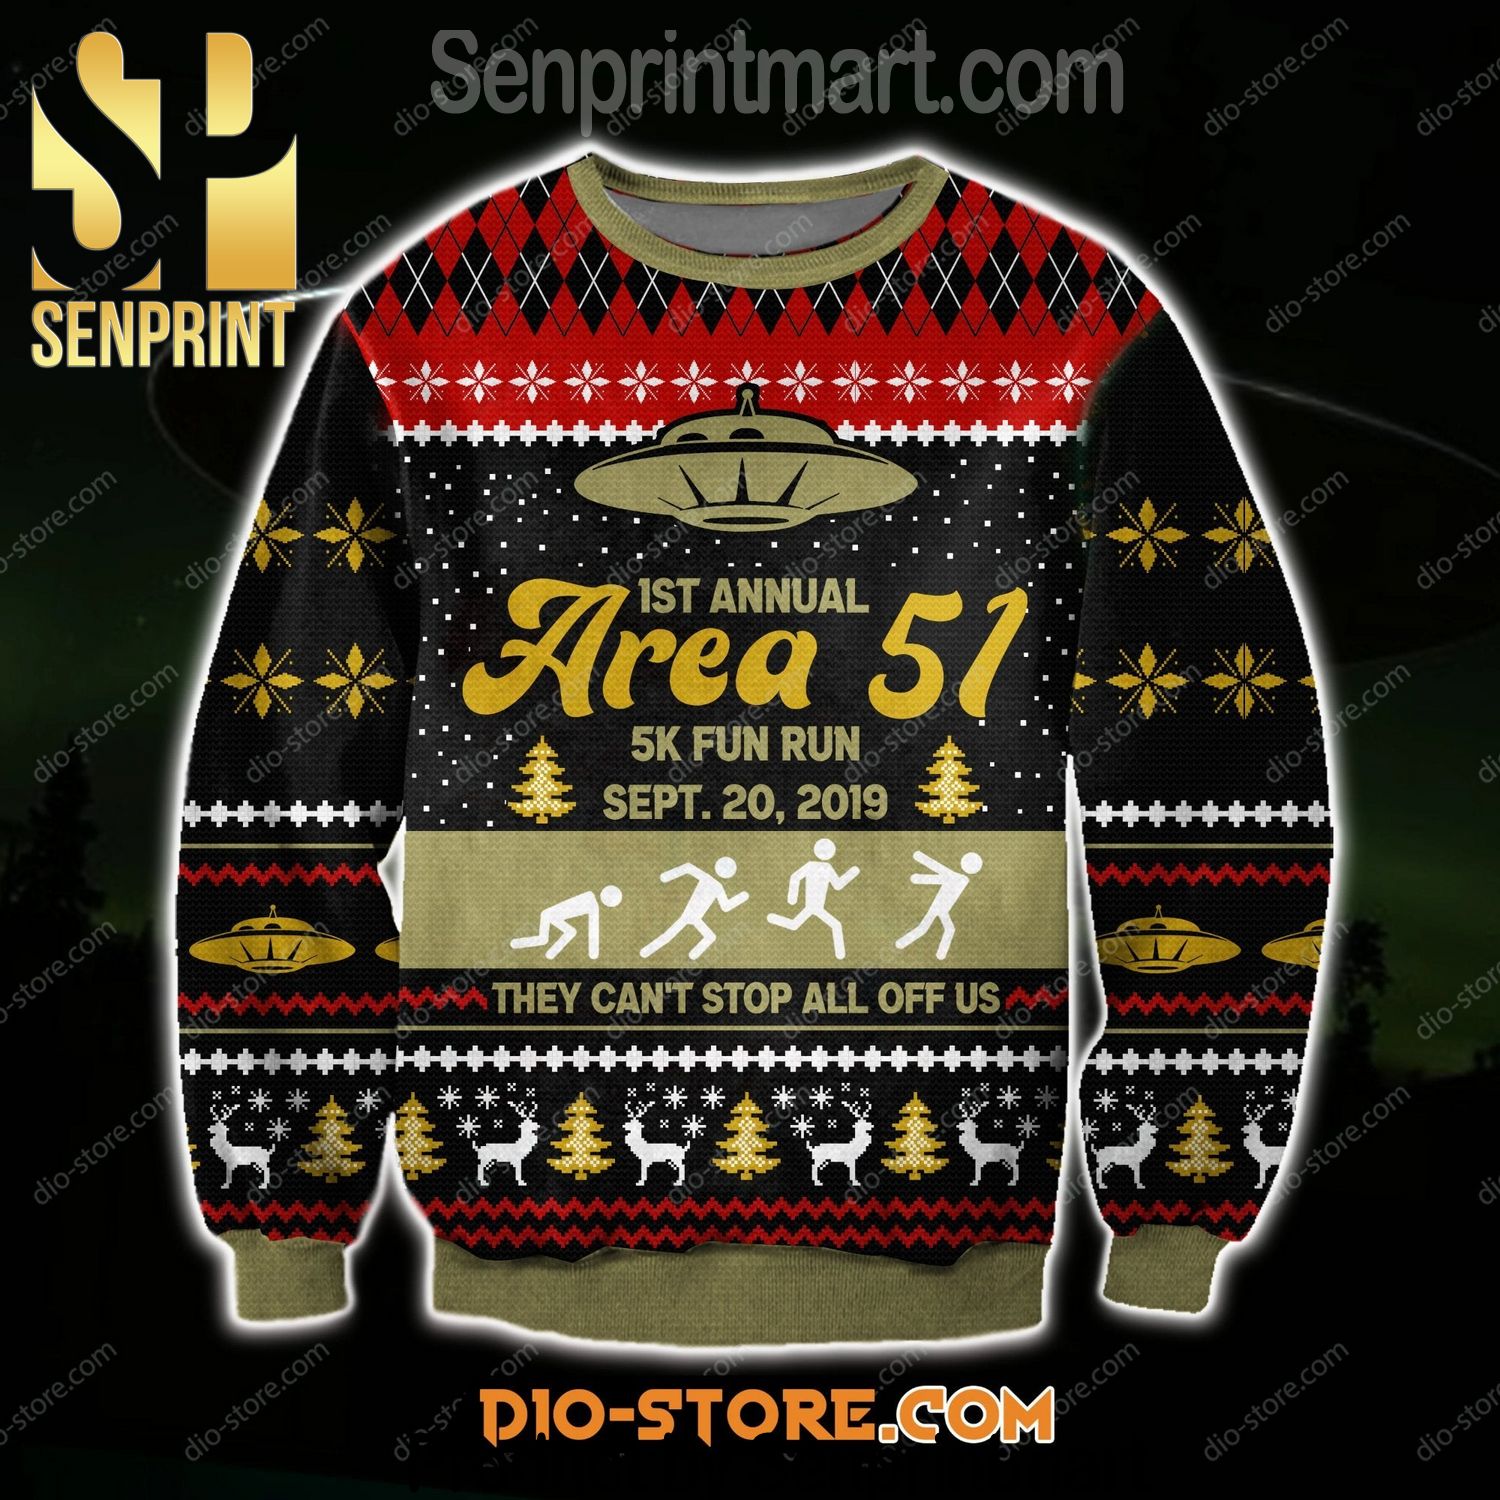 Area 51 Xmas Time All Over Printed Knitted Ugly Christmas Sweater